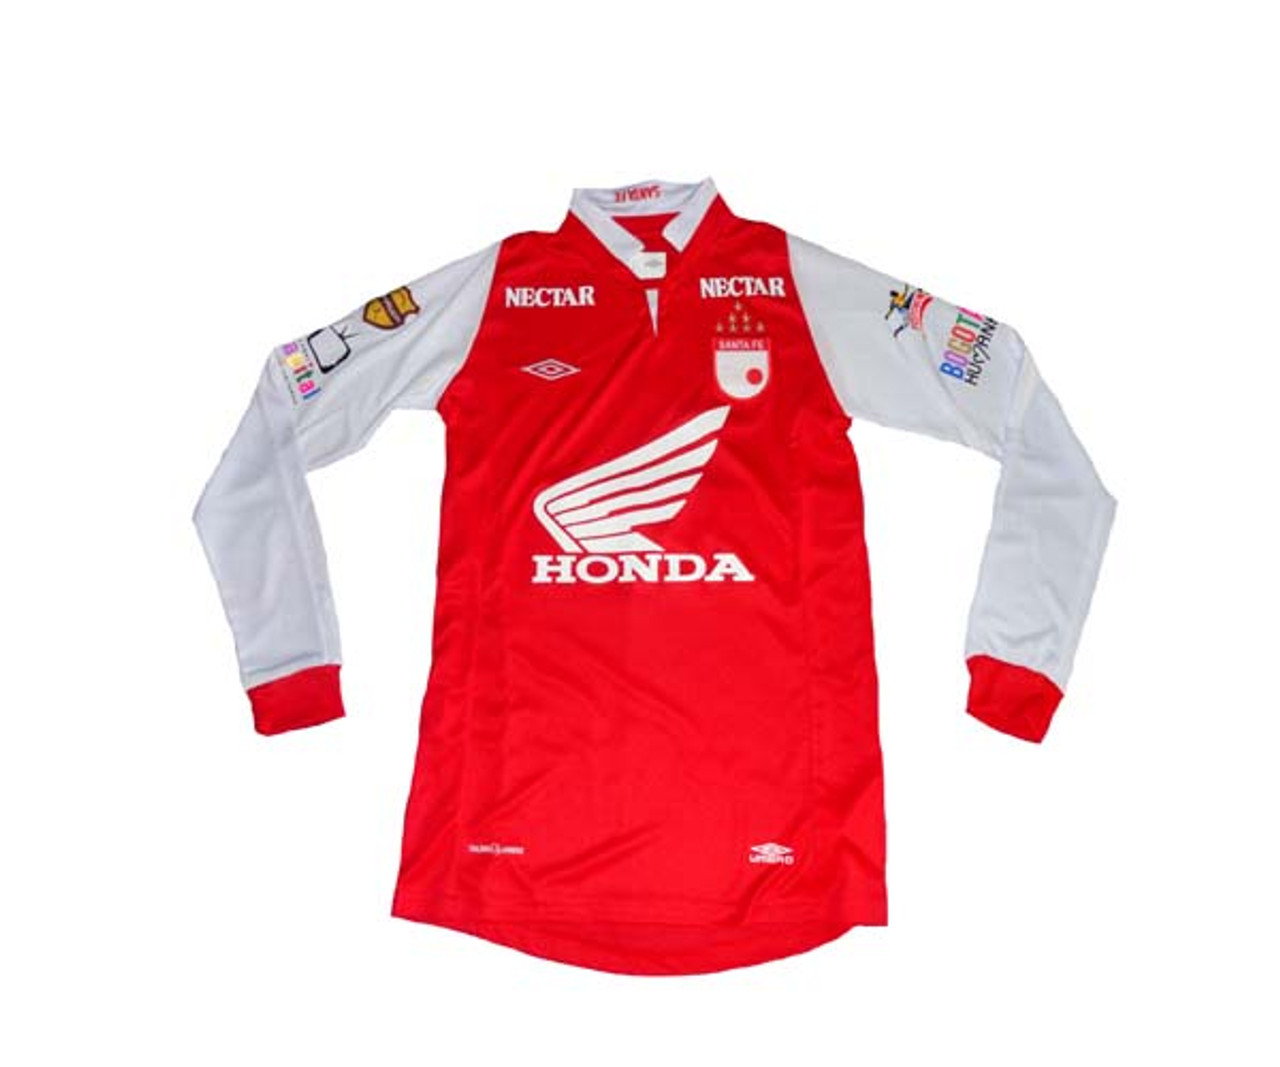 Independiente 2021 PUMA Home and Away Jerseys - FOOTBALL FASHION